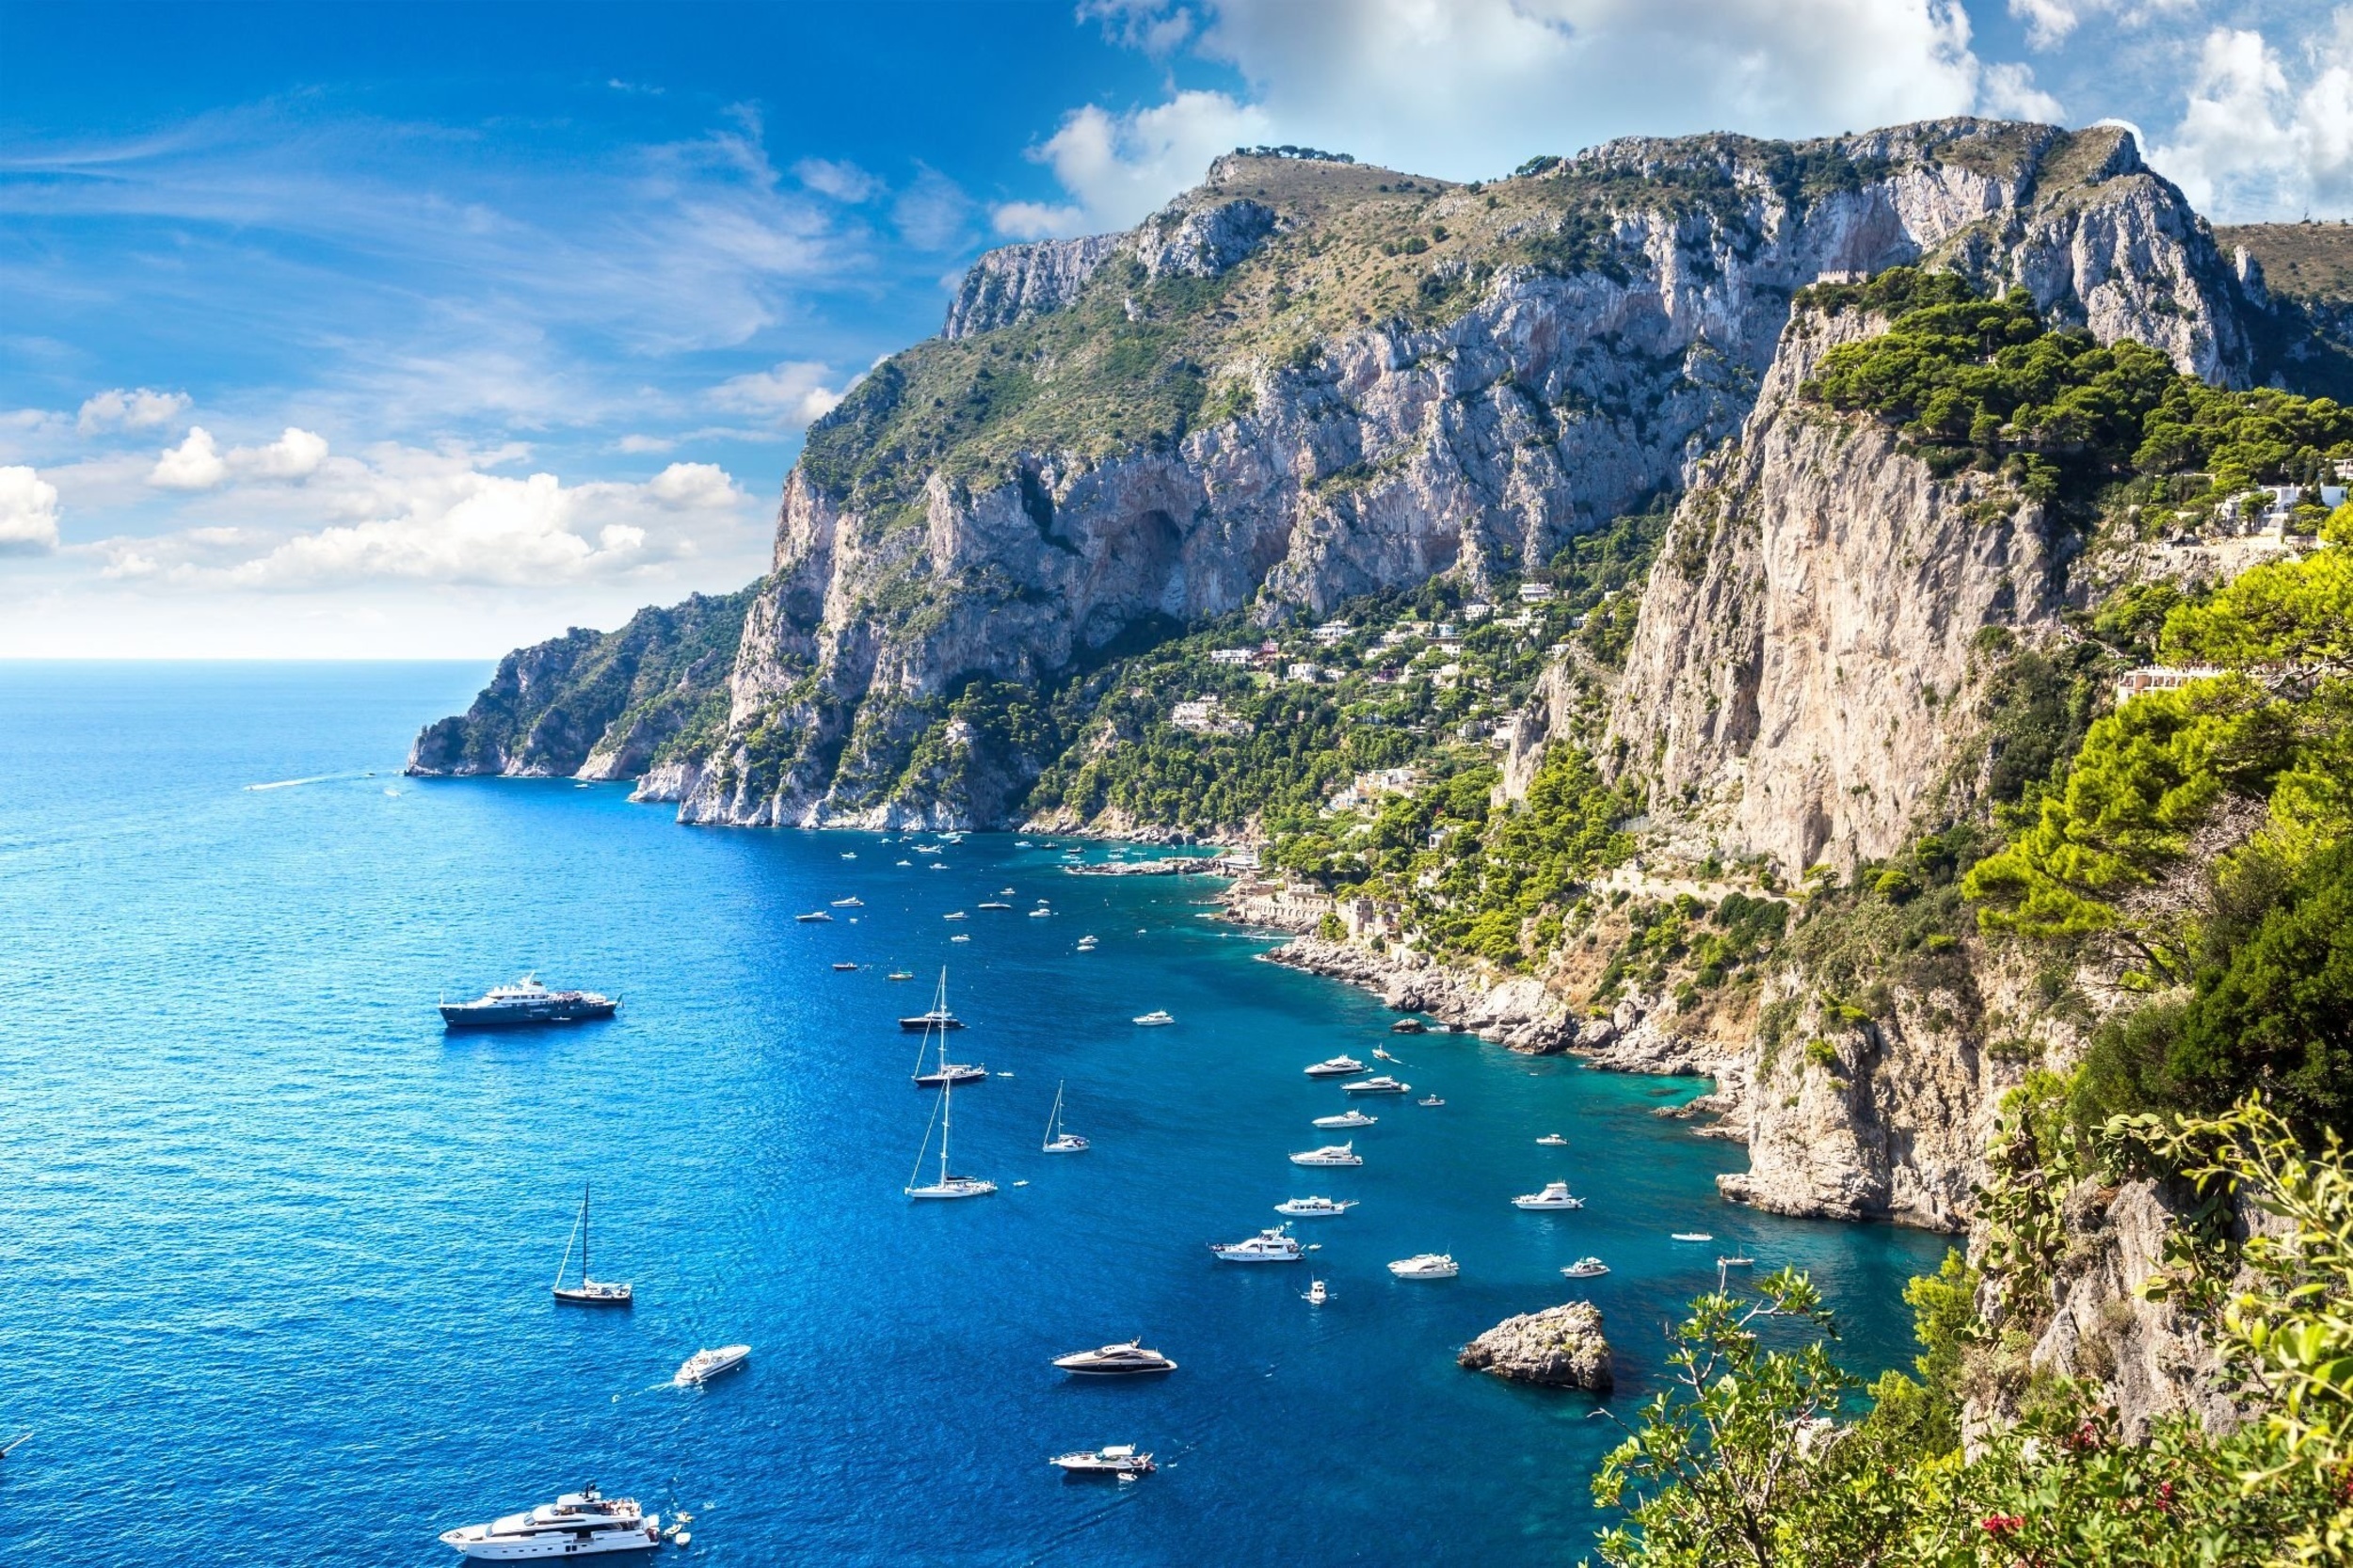 <p>Capri is a gift that keeps on giving, with more beaches than citizens. The island is on many people's bucket lists (as it should be), as is driving the roads, hiking the hills, and exploring the monasteries. Don't forget to rent a boat: you've earned it. </p><p>You may also like: <a href='https://www.yardbarker.com/lifestyle/articles/15_things_you_must_do_in_venice_italy_031624/s1__36523664'>15 things you must do in Venice, Italy</a></p>